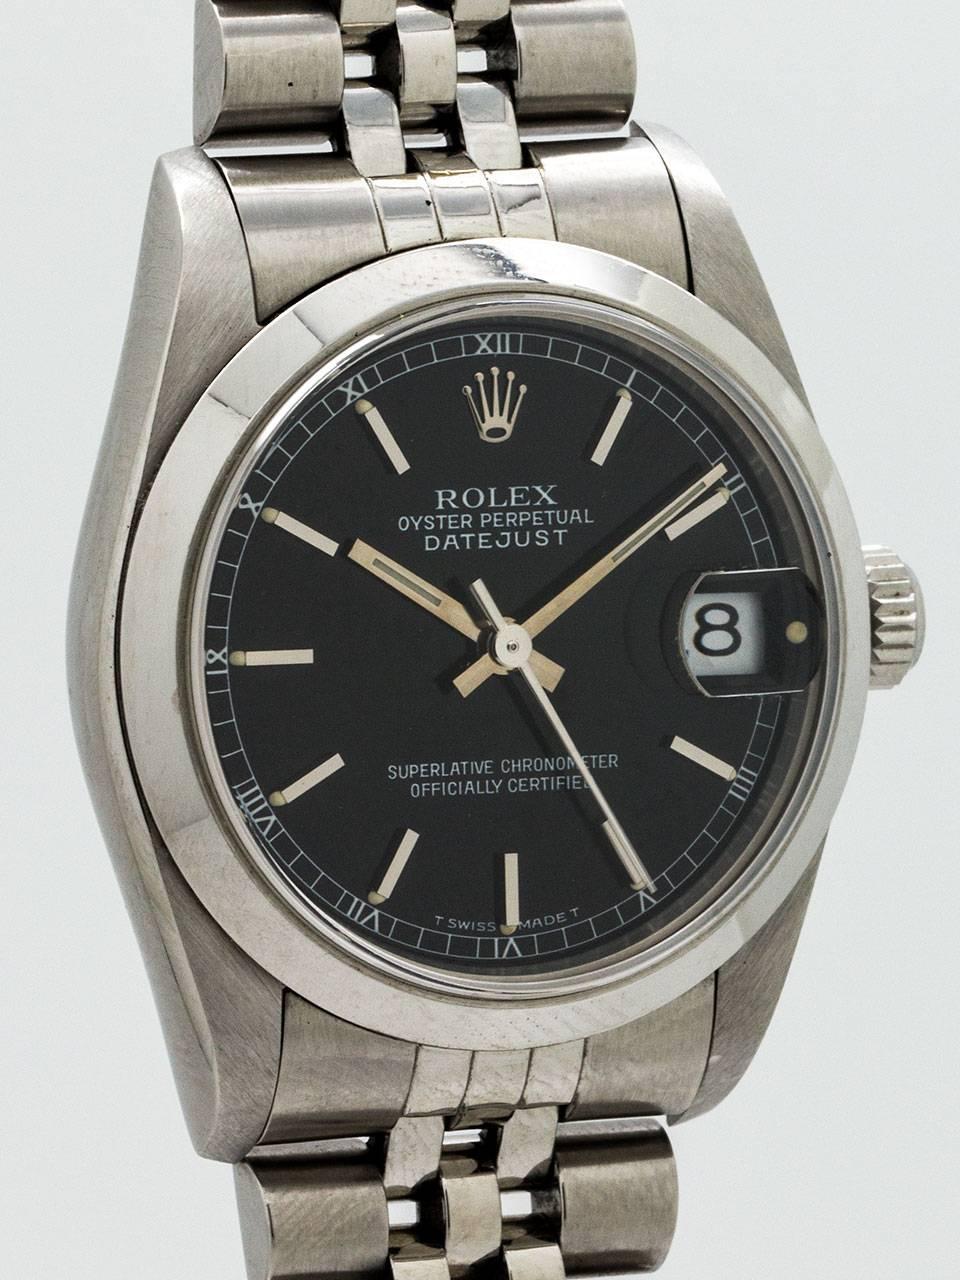 Rolex Stainless Steel Midsize Datejust ref 68240 serial # U9 circa 1997. Featuring 31mm diameter stainless steel case with smooth bezel and sapphire crystal.  Screw down signed Rolex Oyster crown and case back. Glossy black original dial with